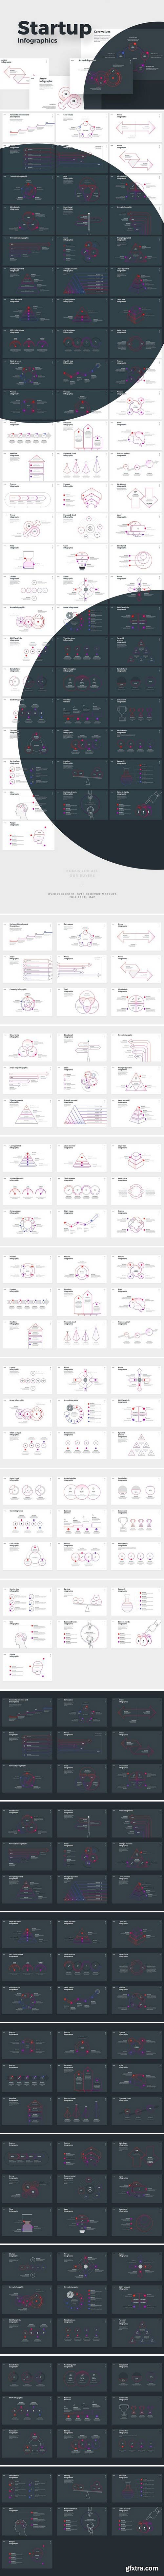 CM - STARTUP powerpoint infographics 1797533